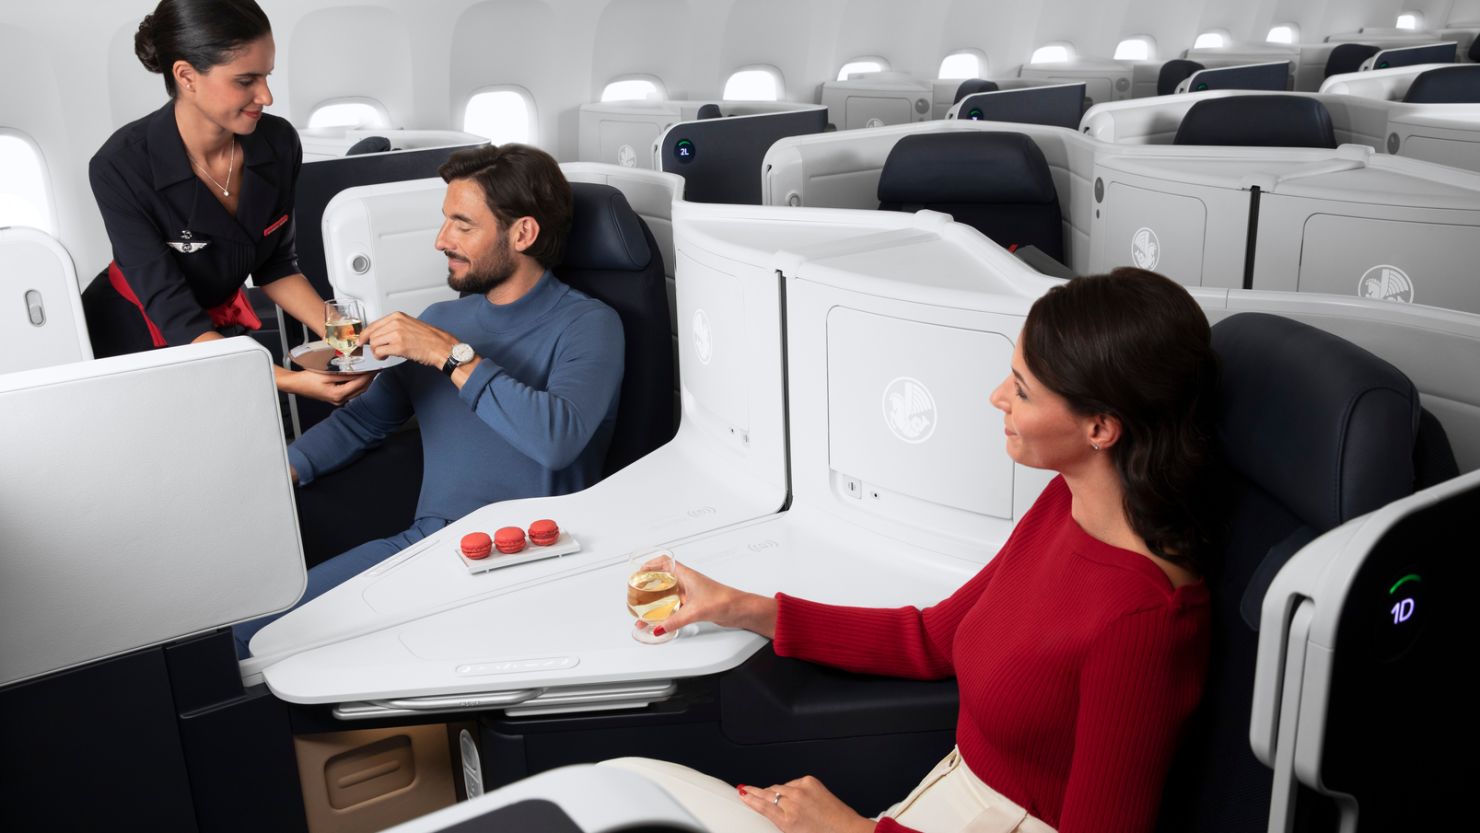 The new Air France business class cabin entered service on January 20.